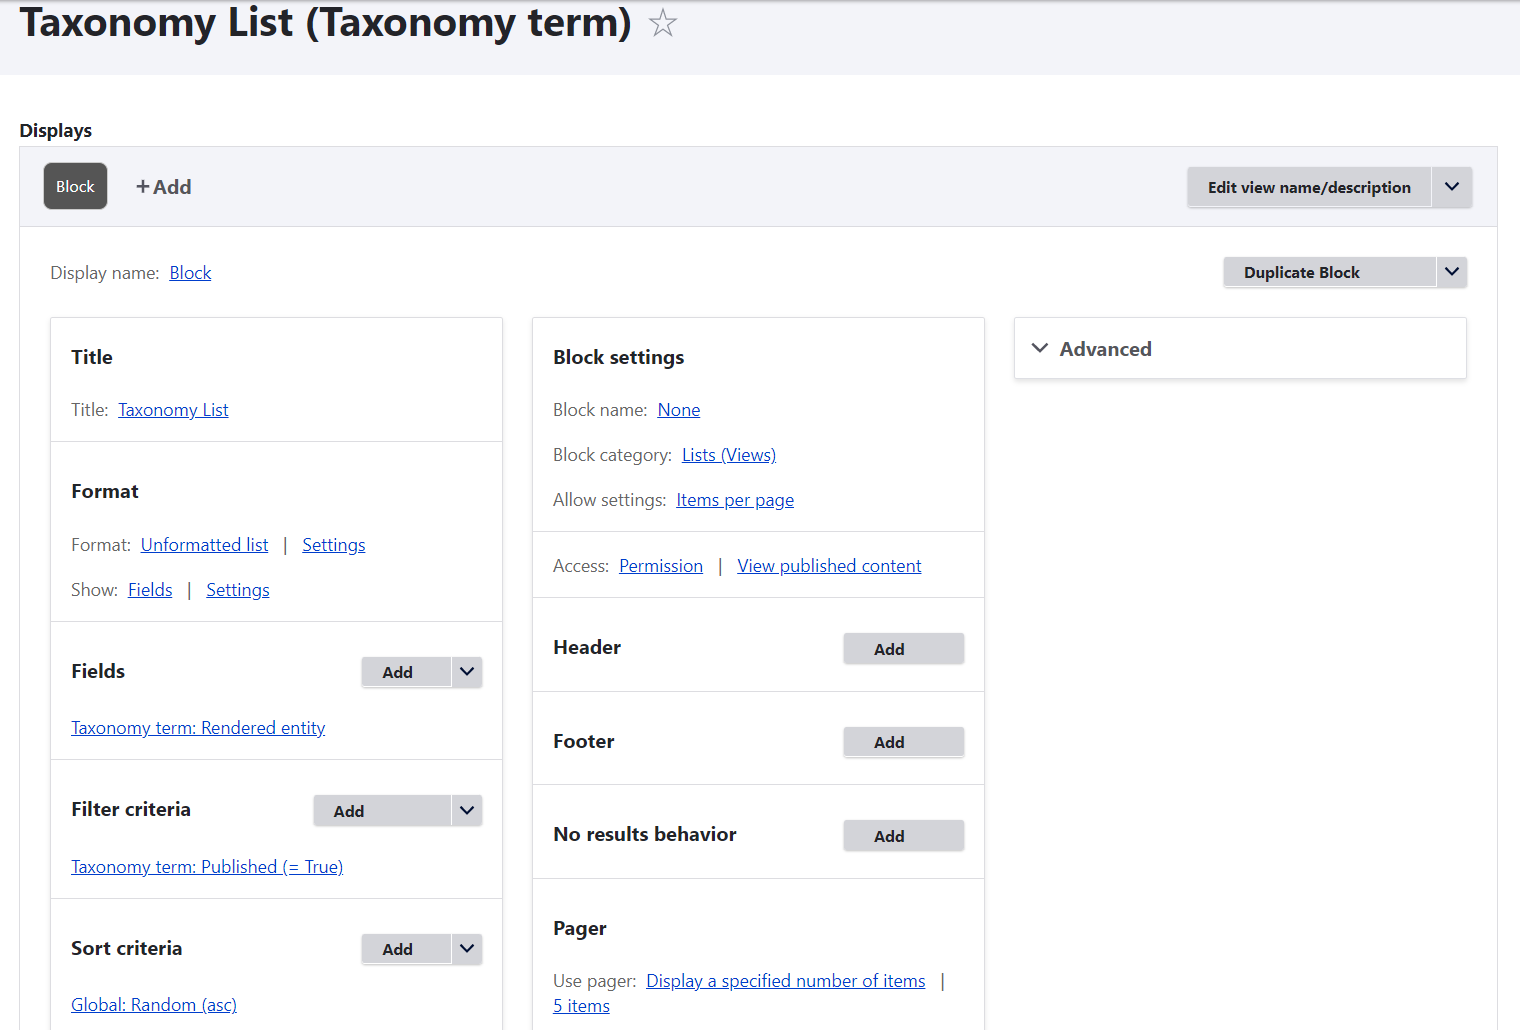 A taxonomy view with a “Rendered entity” field and random sorting.